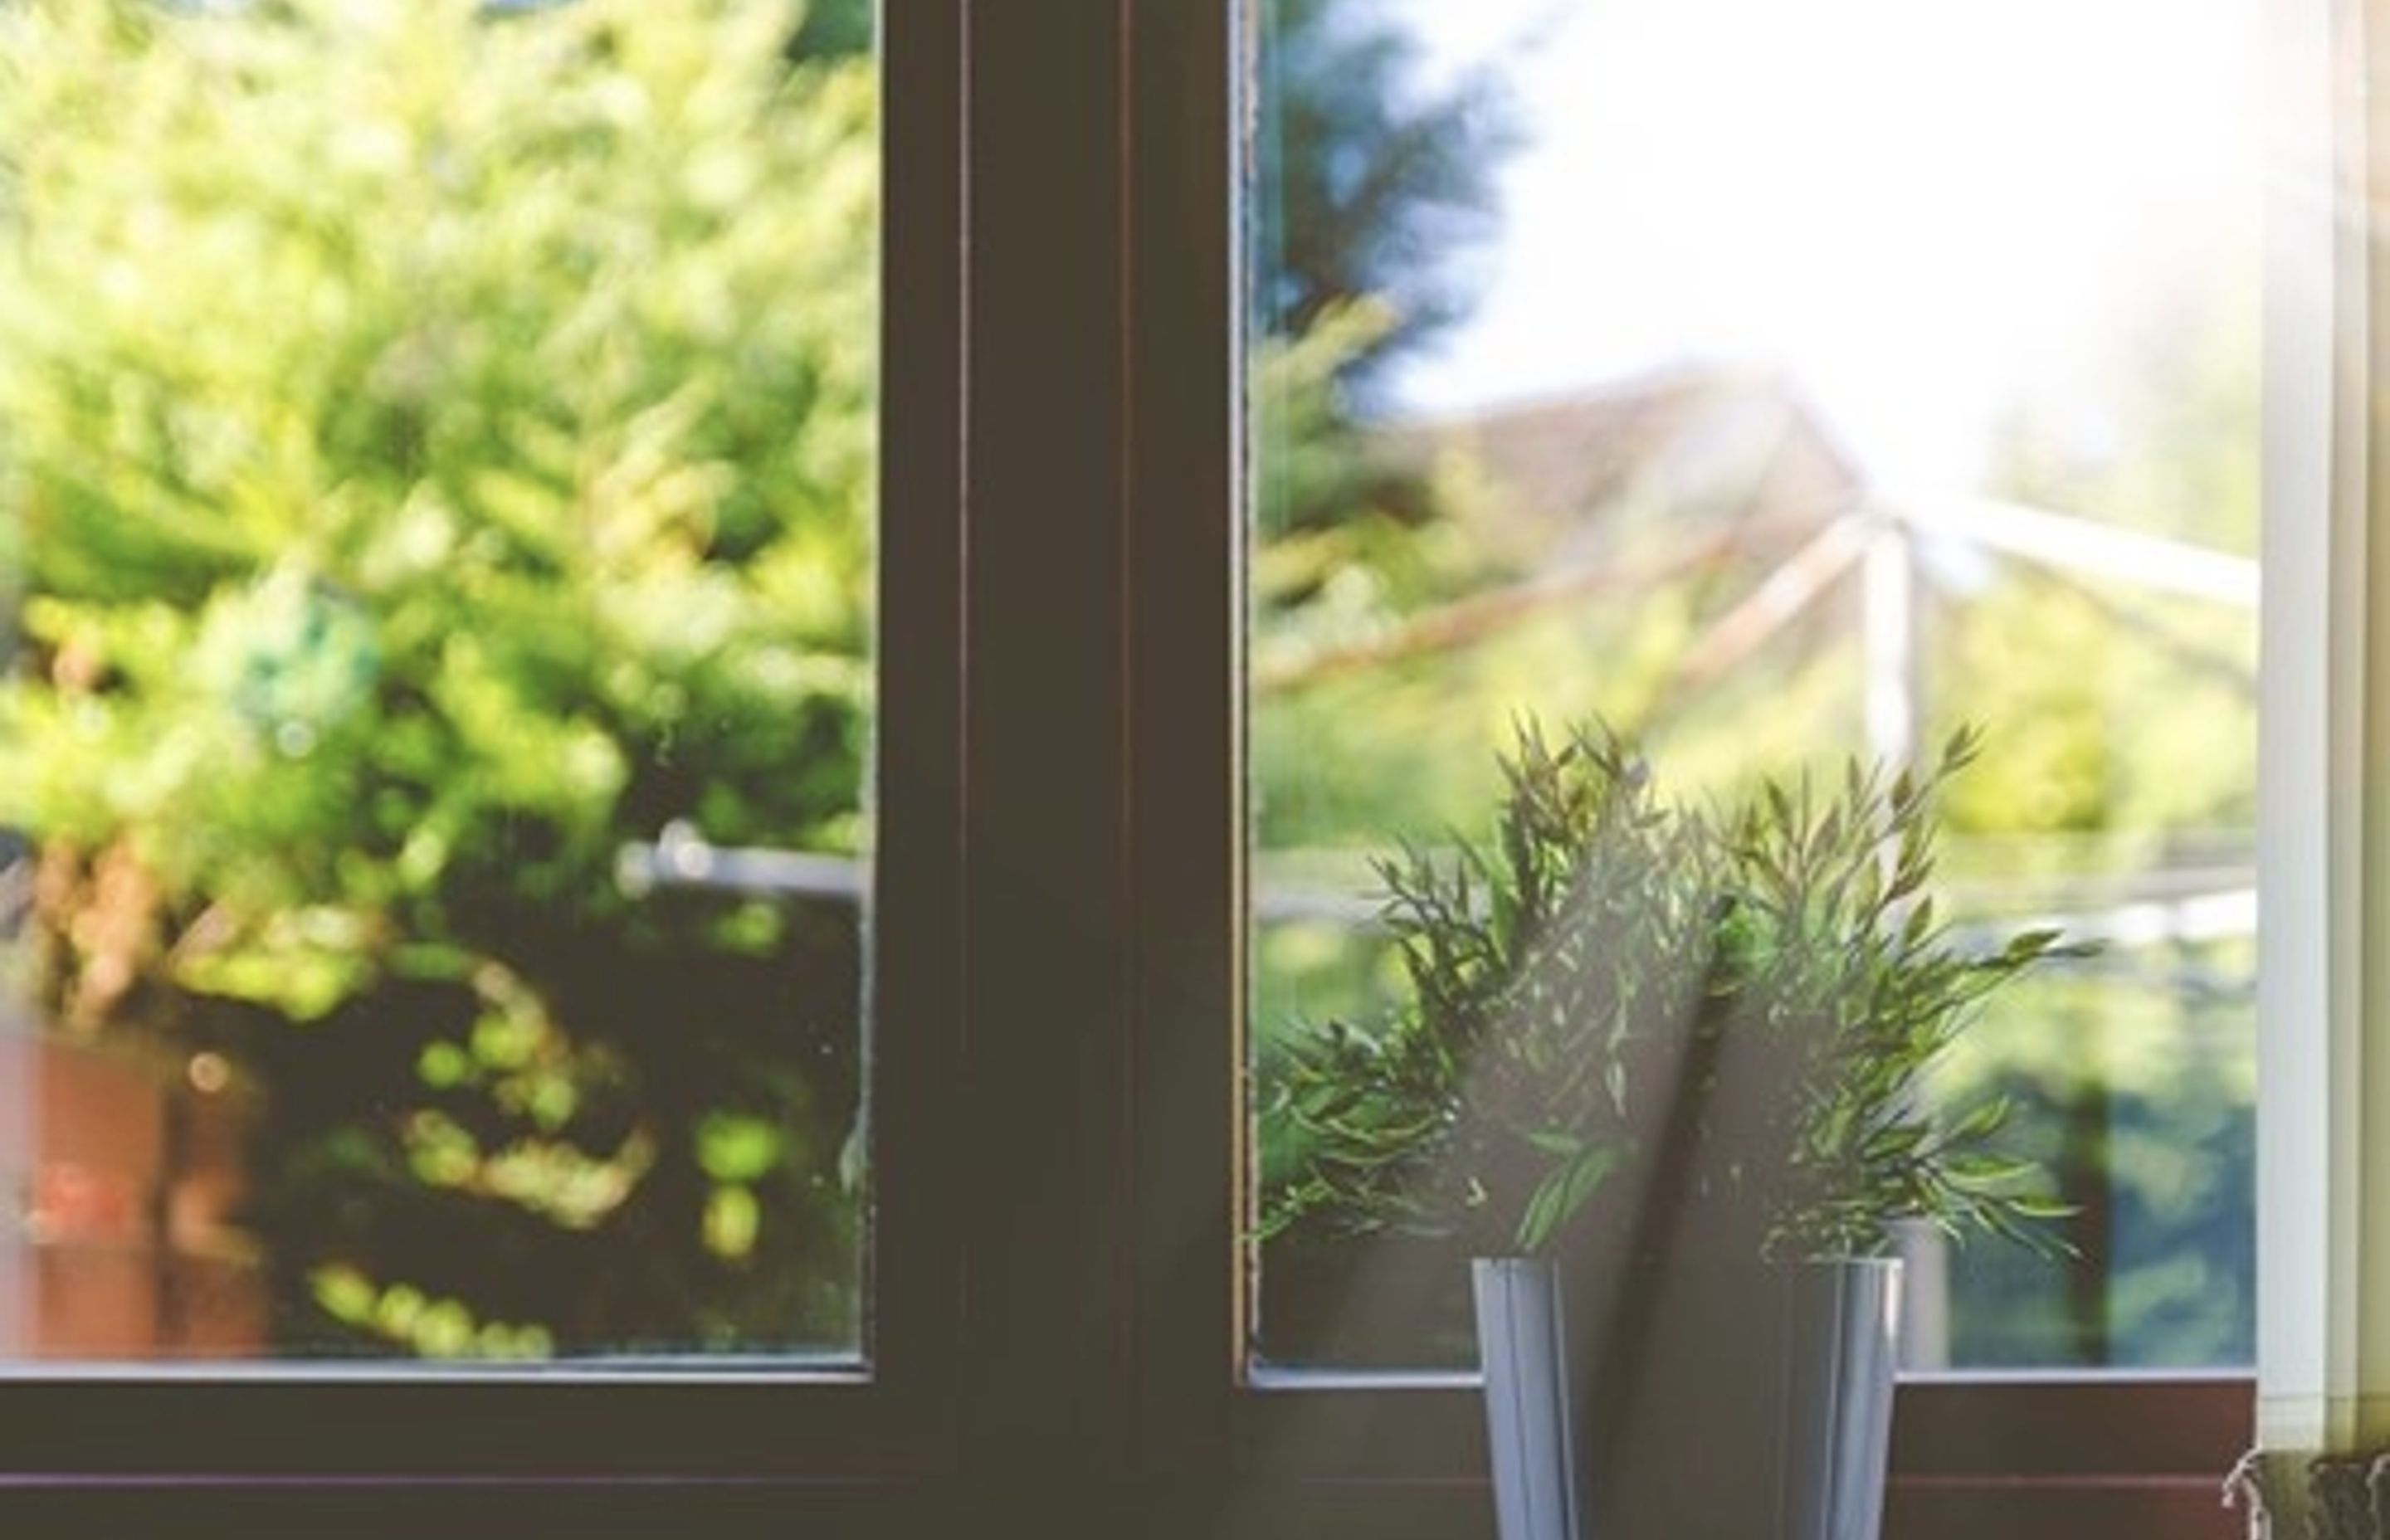 If your wooden windows need replacing consider, aluminium systems for a quick installation and increased thermal efficiency.